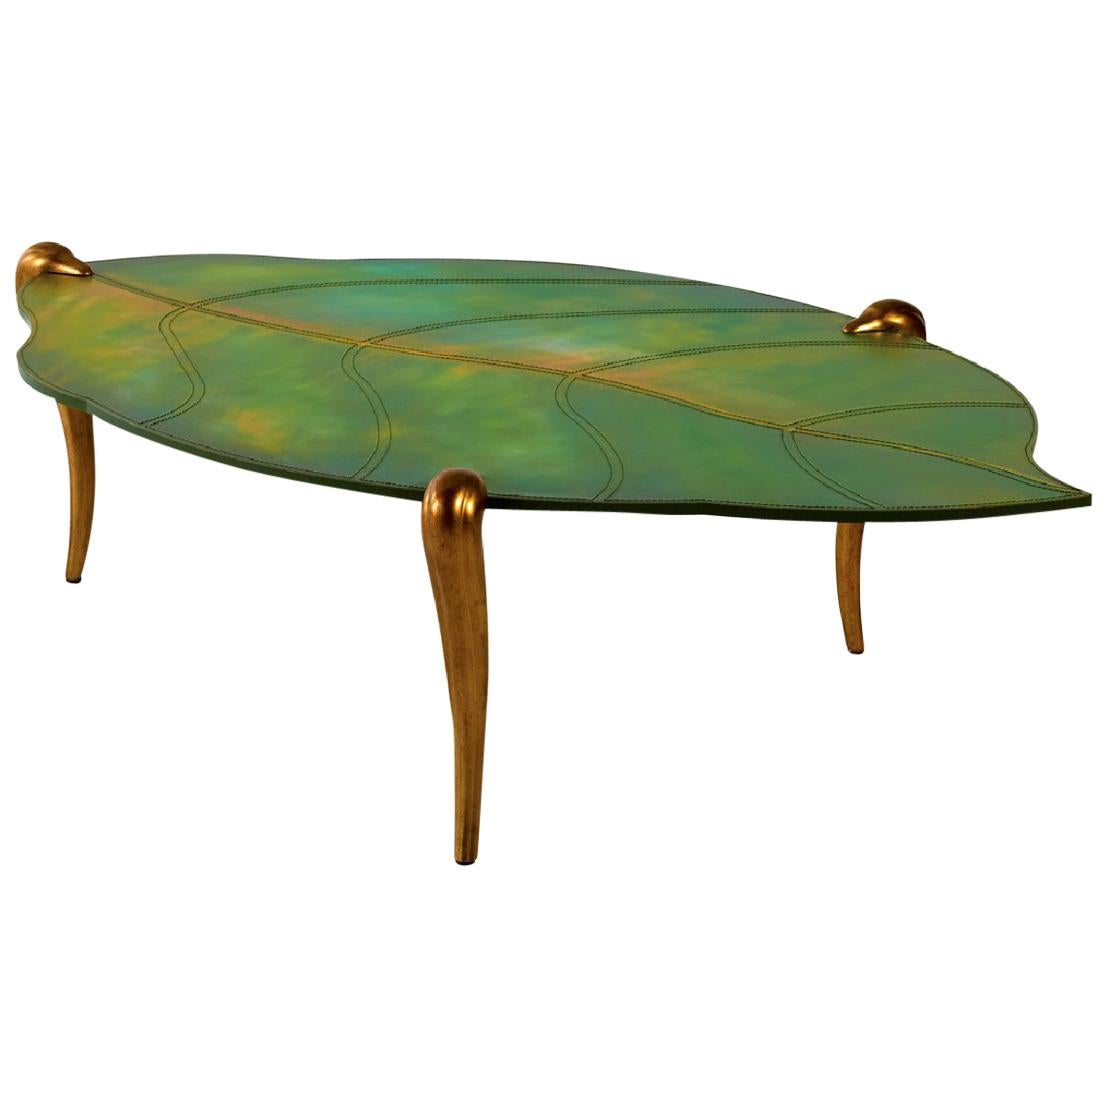 Coffee Table with Cast Alluminium Legs Gold Finish Hard Leather Top